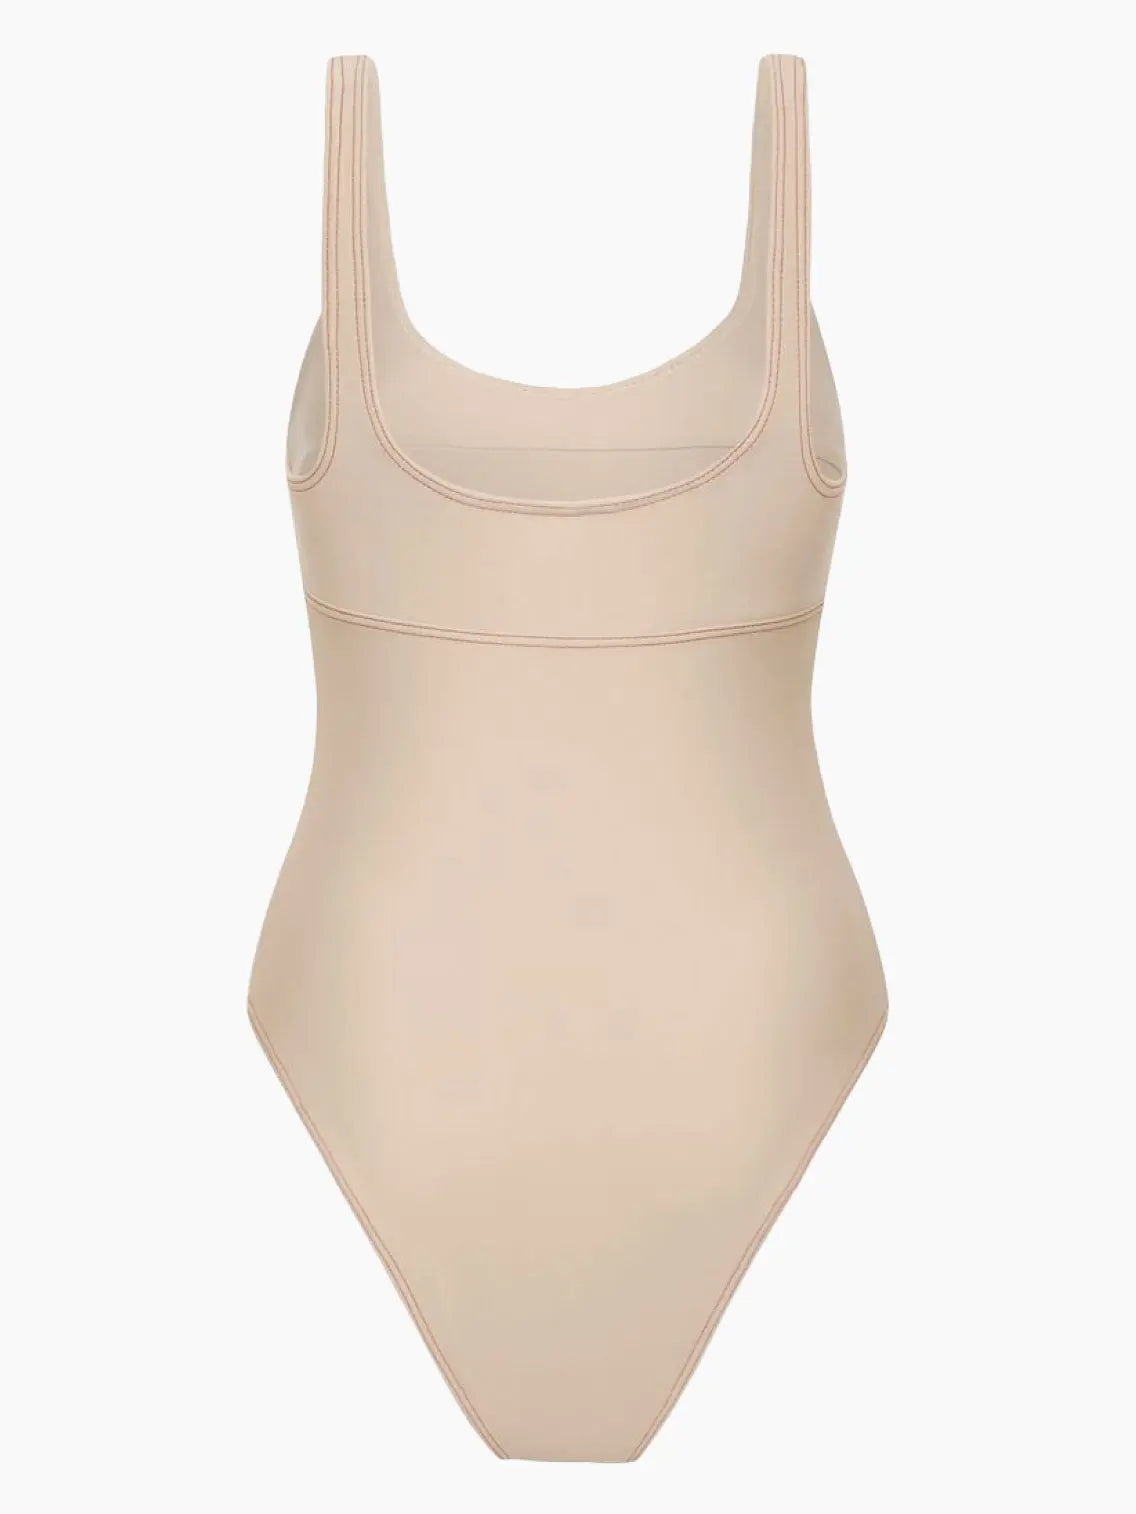 A Beige Contrast One Piece Swimwear with a scoop neckline and wide shoulder straps. The swimsuit features subtle seam detailing under the bust, creating a flattering silhouette. The fabric appears smooth and stretchy, designed for a snug fit. Now available at Bassal Store in Barcelona!